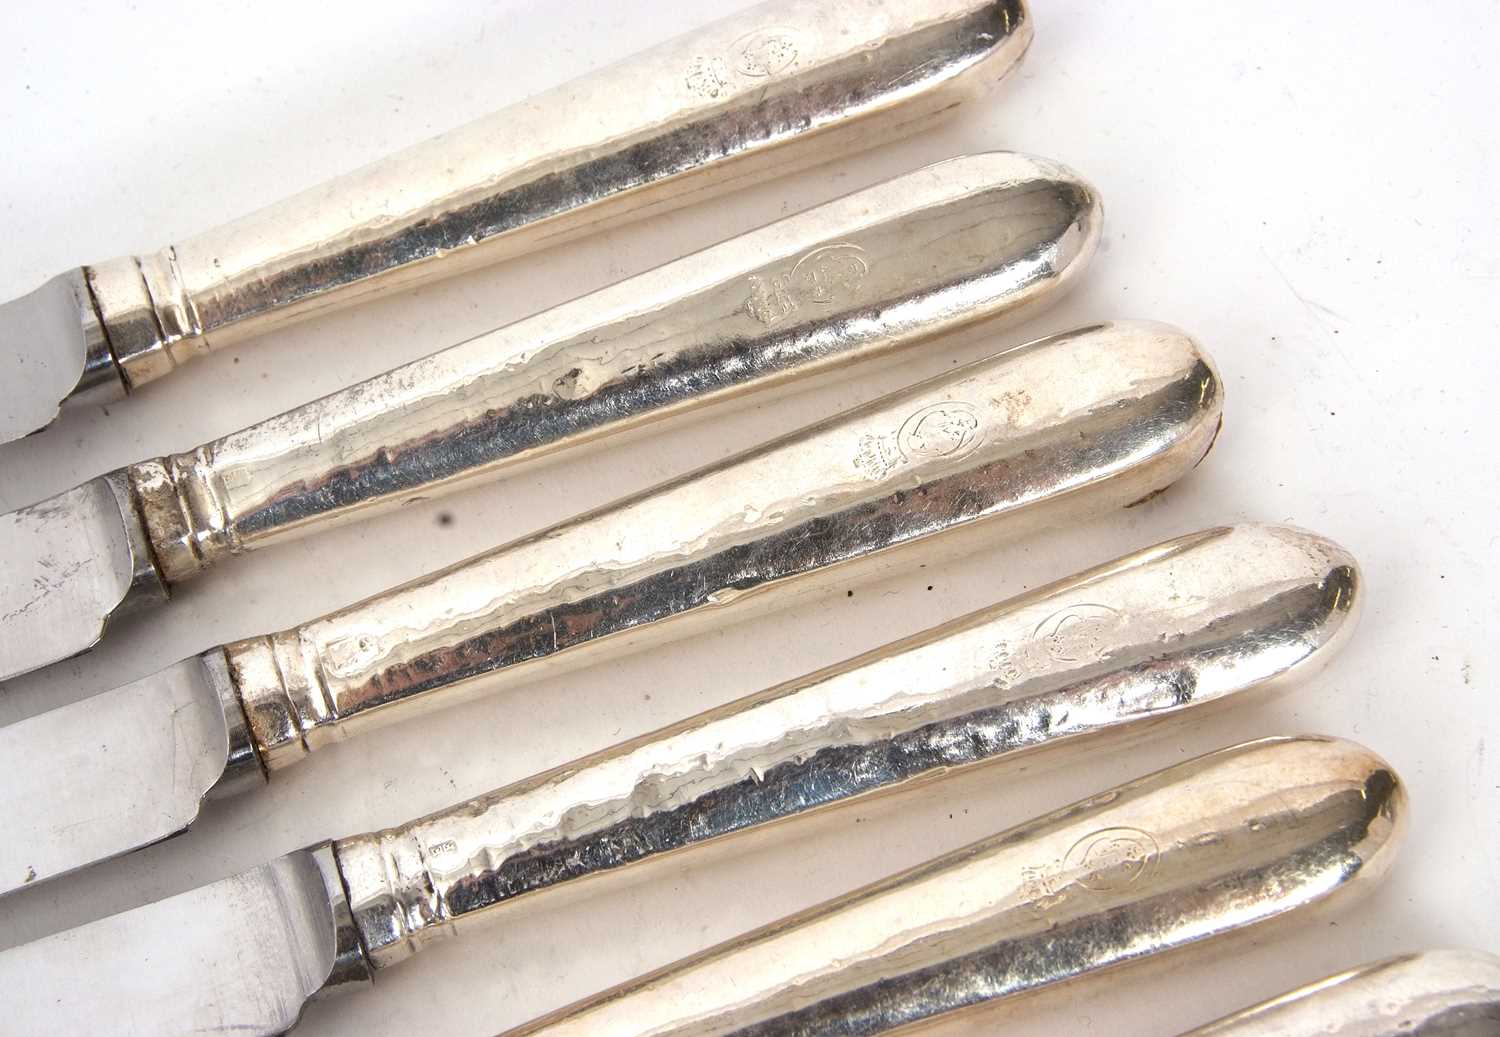 Six silver handled table knives, makers mark rubbed, London assay, makers mark showing as William - Image 4 of 4